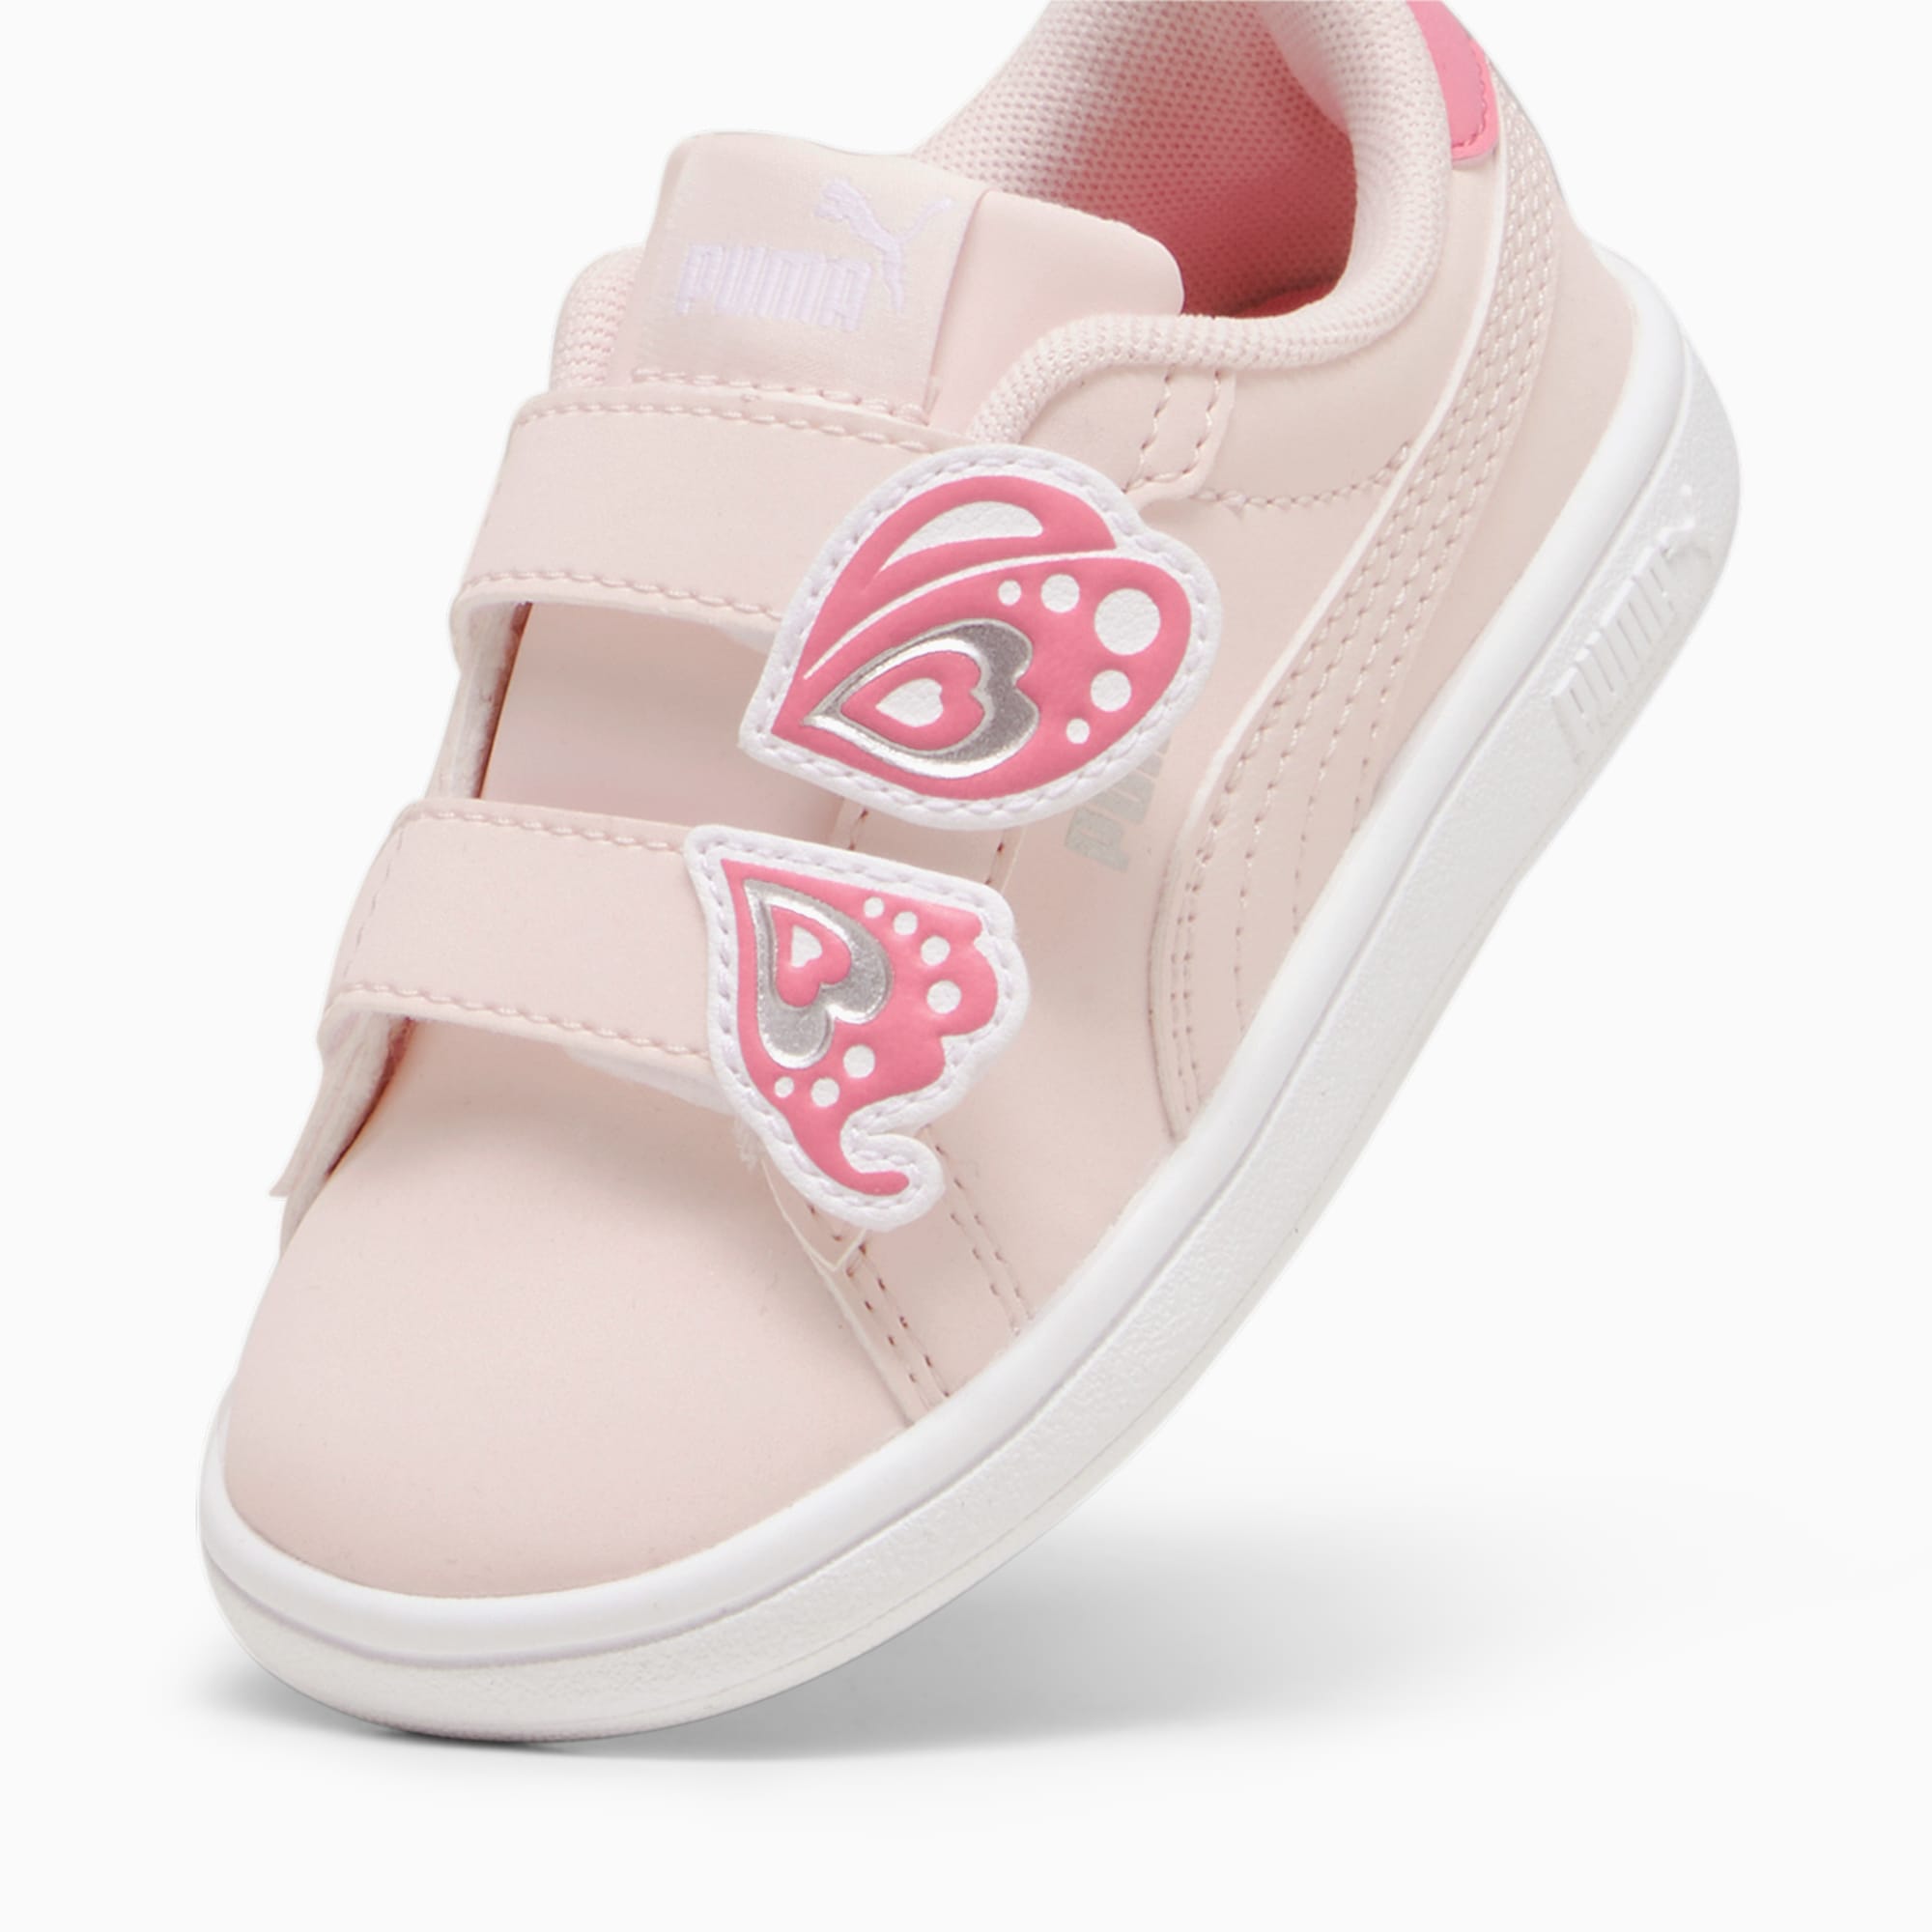 PUMA Smash 3.0 Butterfly Toddlers' Sneakers, Frosty Pink/Strawberry Burst/White